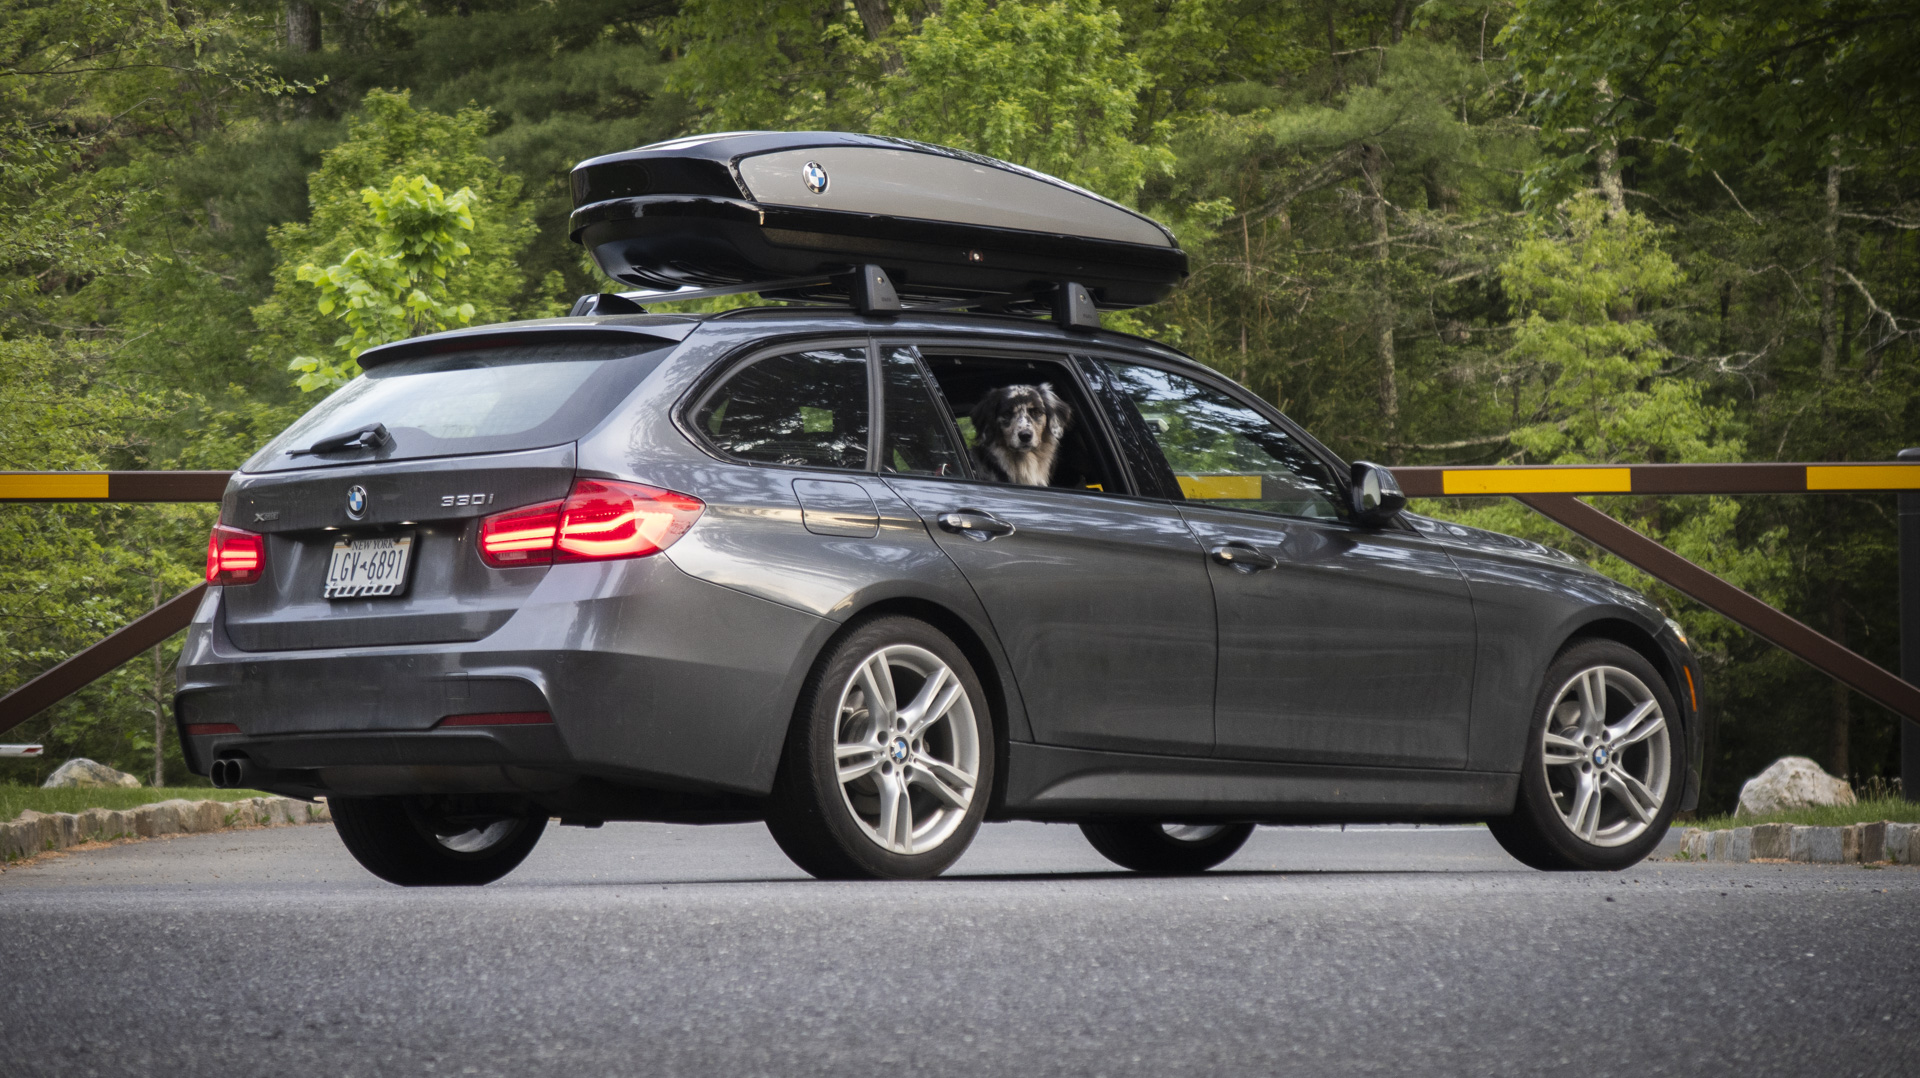 BMW’s OEM Roof Boxes Are the Best in the Game